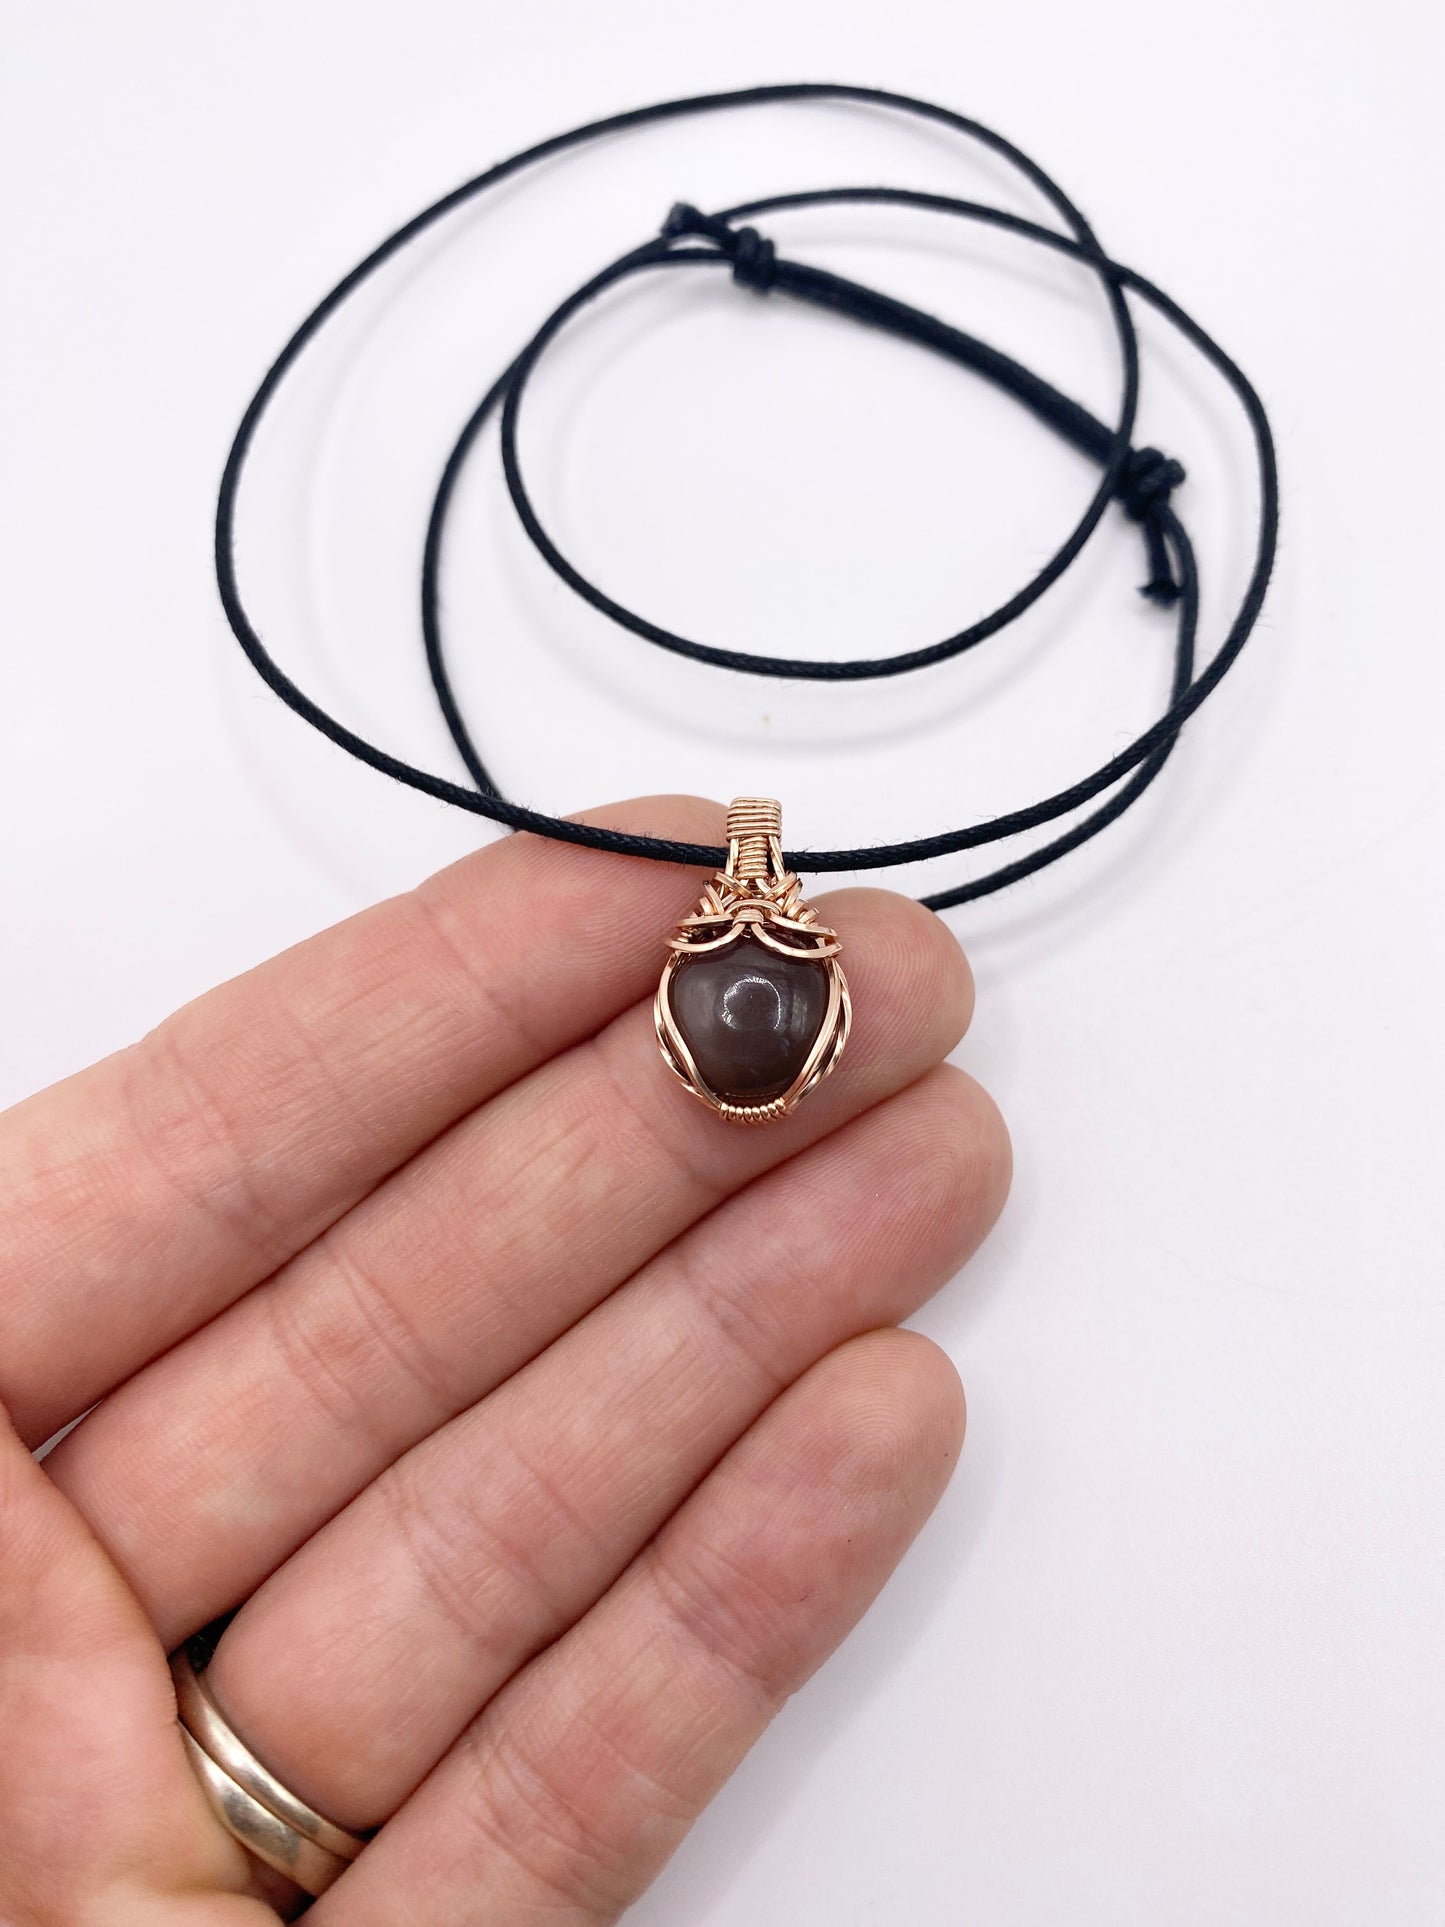 New Moon Wire Wrapped Gray Mini Moonstone Necklace - Original Design in 14K Rose Gold Fill Wire